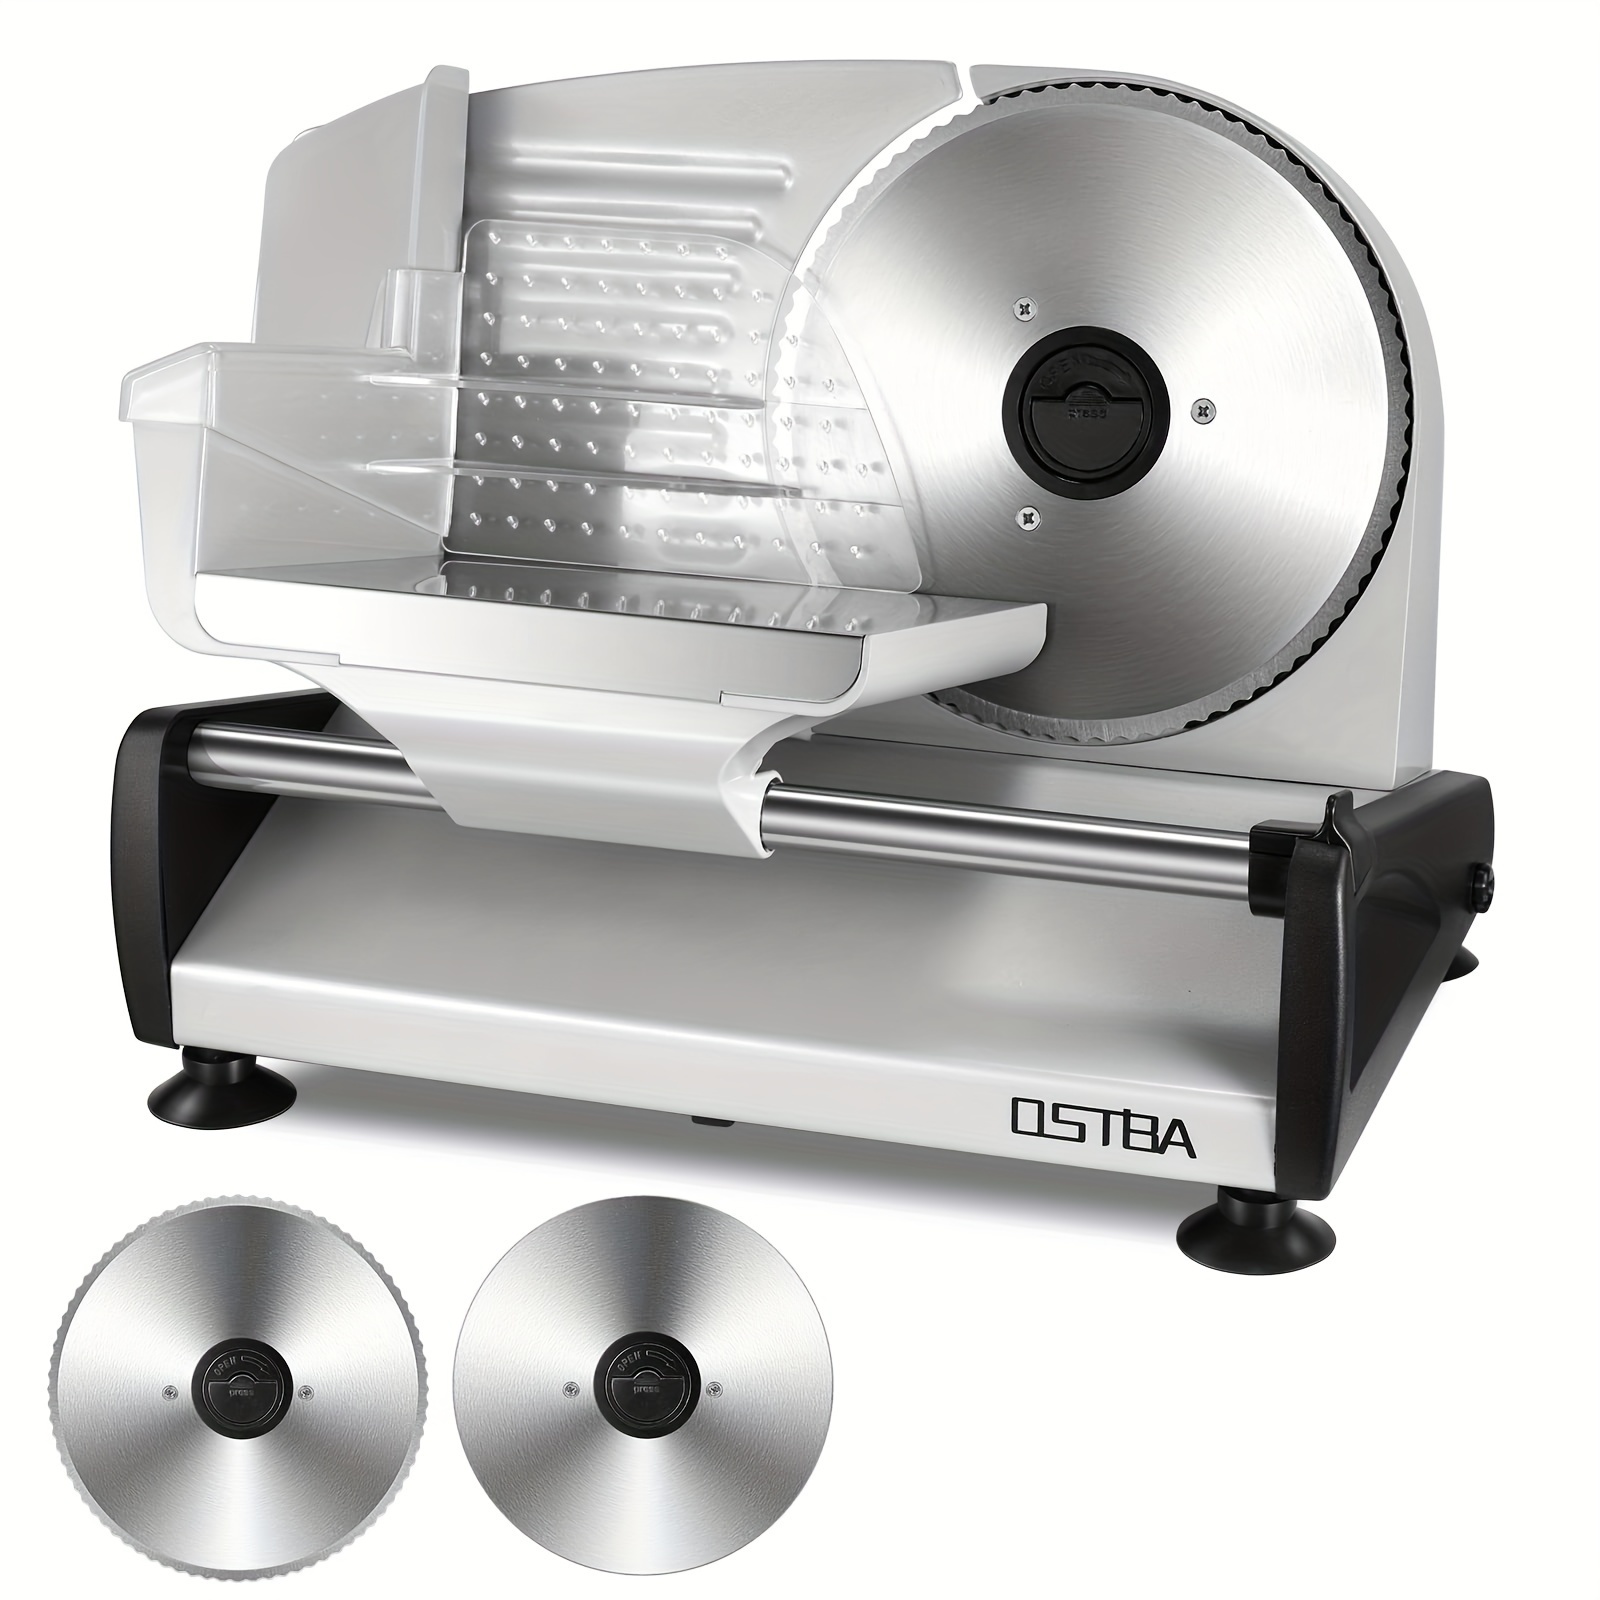 

Meat Slicer Electric Food Slicer With Child Lock Protection, Removable 7.5 Stainless Steel Blade And Food Carriage, Adjustable Thickness Food Slicer Machine For Meat, Cheese, Bread150w/200w